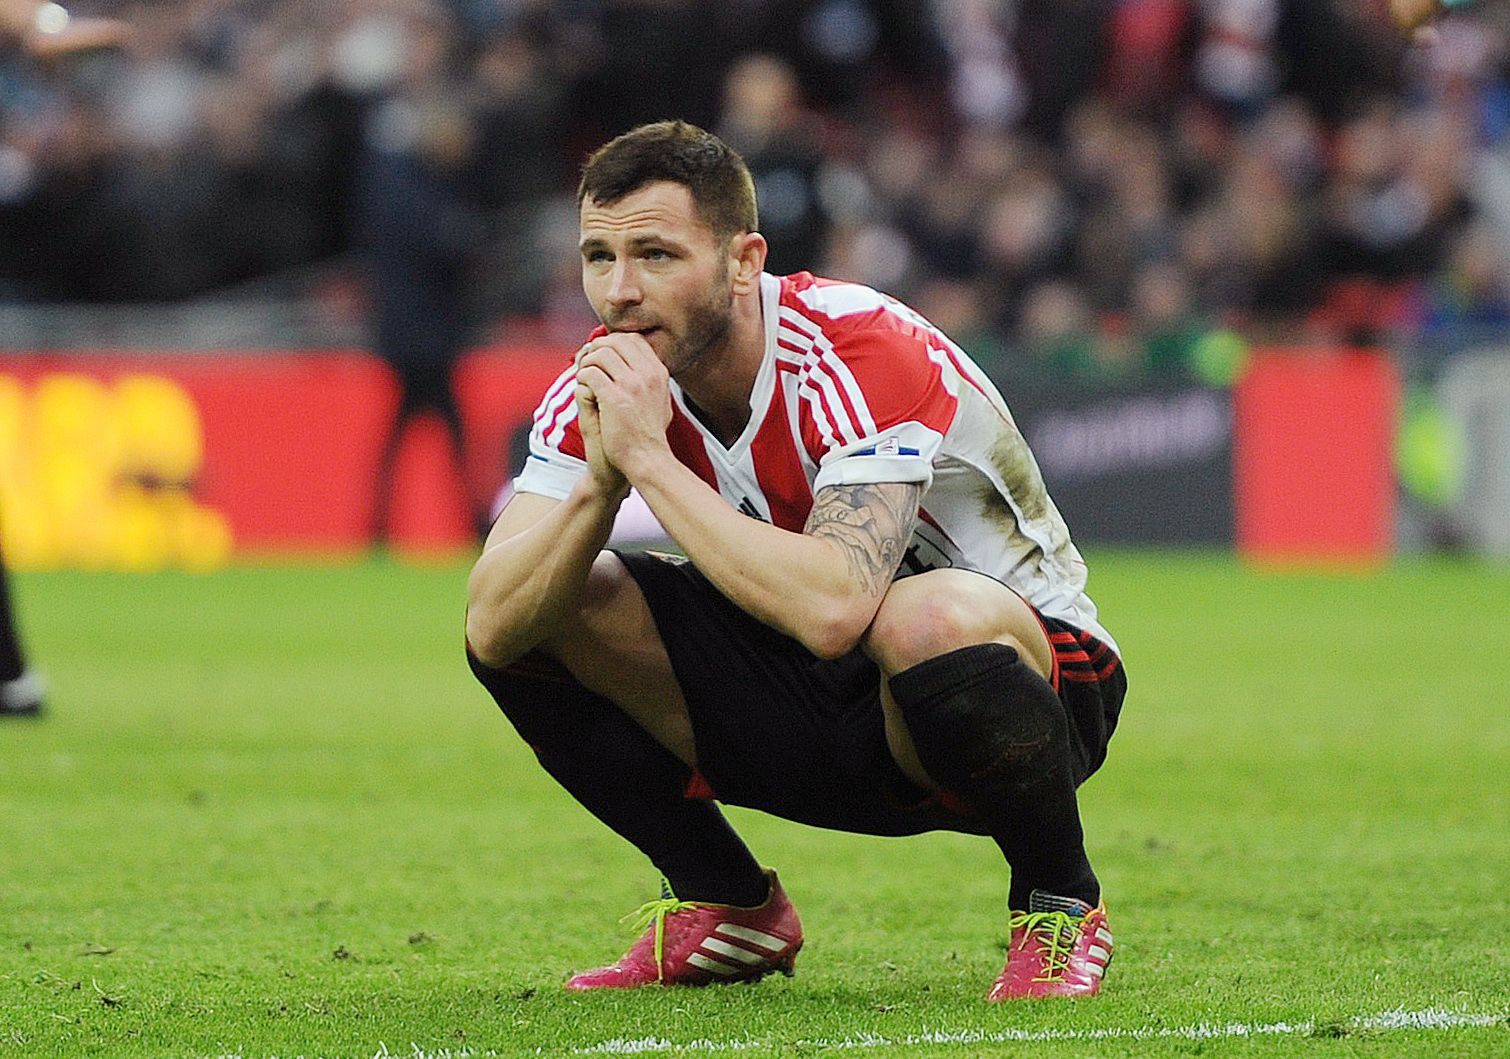 Football - Manchester City v Sunderland - Capital One Cup Final - Wembley Stadium - 2/3/14 
Sunderland's Phil Bardsley looks dejected 
Mandatory Credit: Action Images / Alex Morton 
Livepic 
EDITORIAL USE ONLY. No use with unauthorized audio, video, data, fixture lists, club/league logos or 